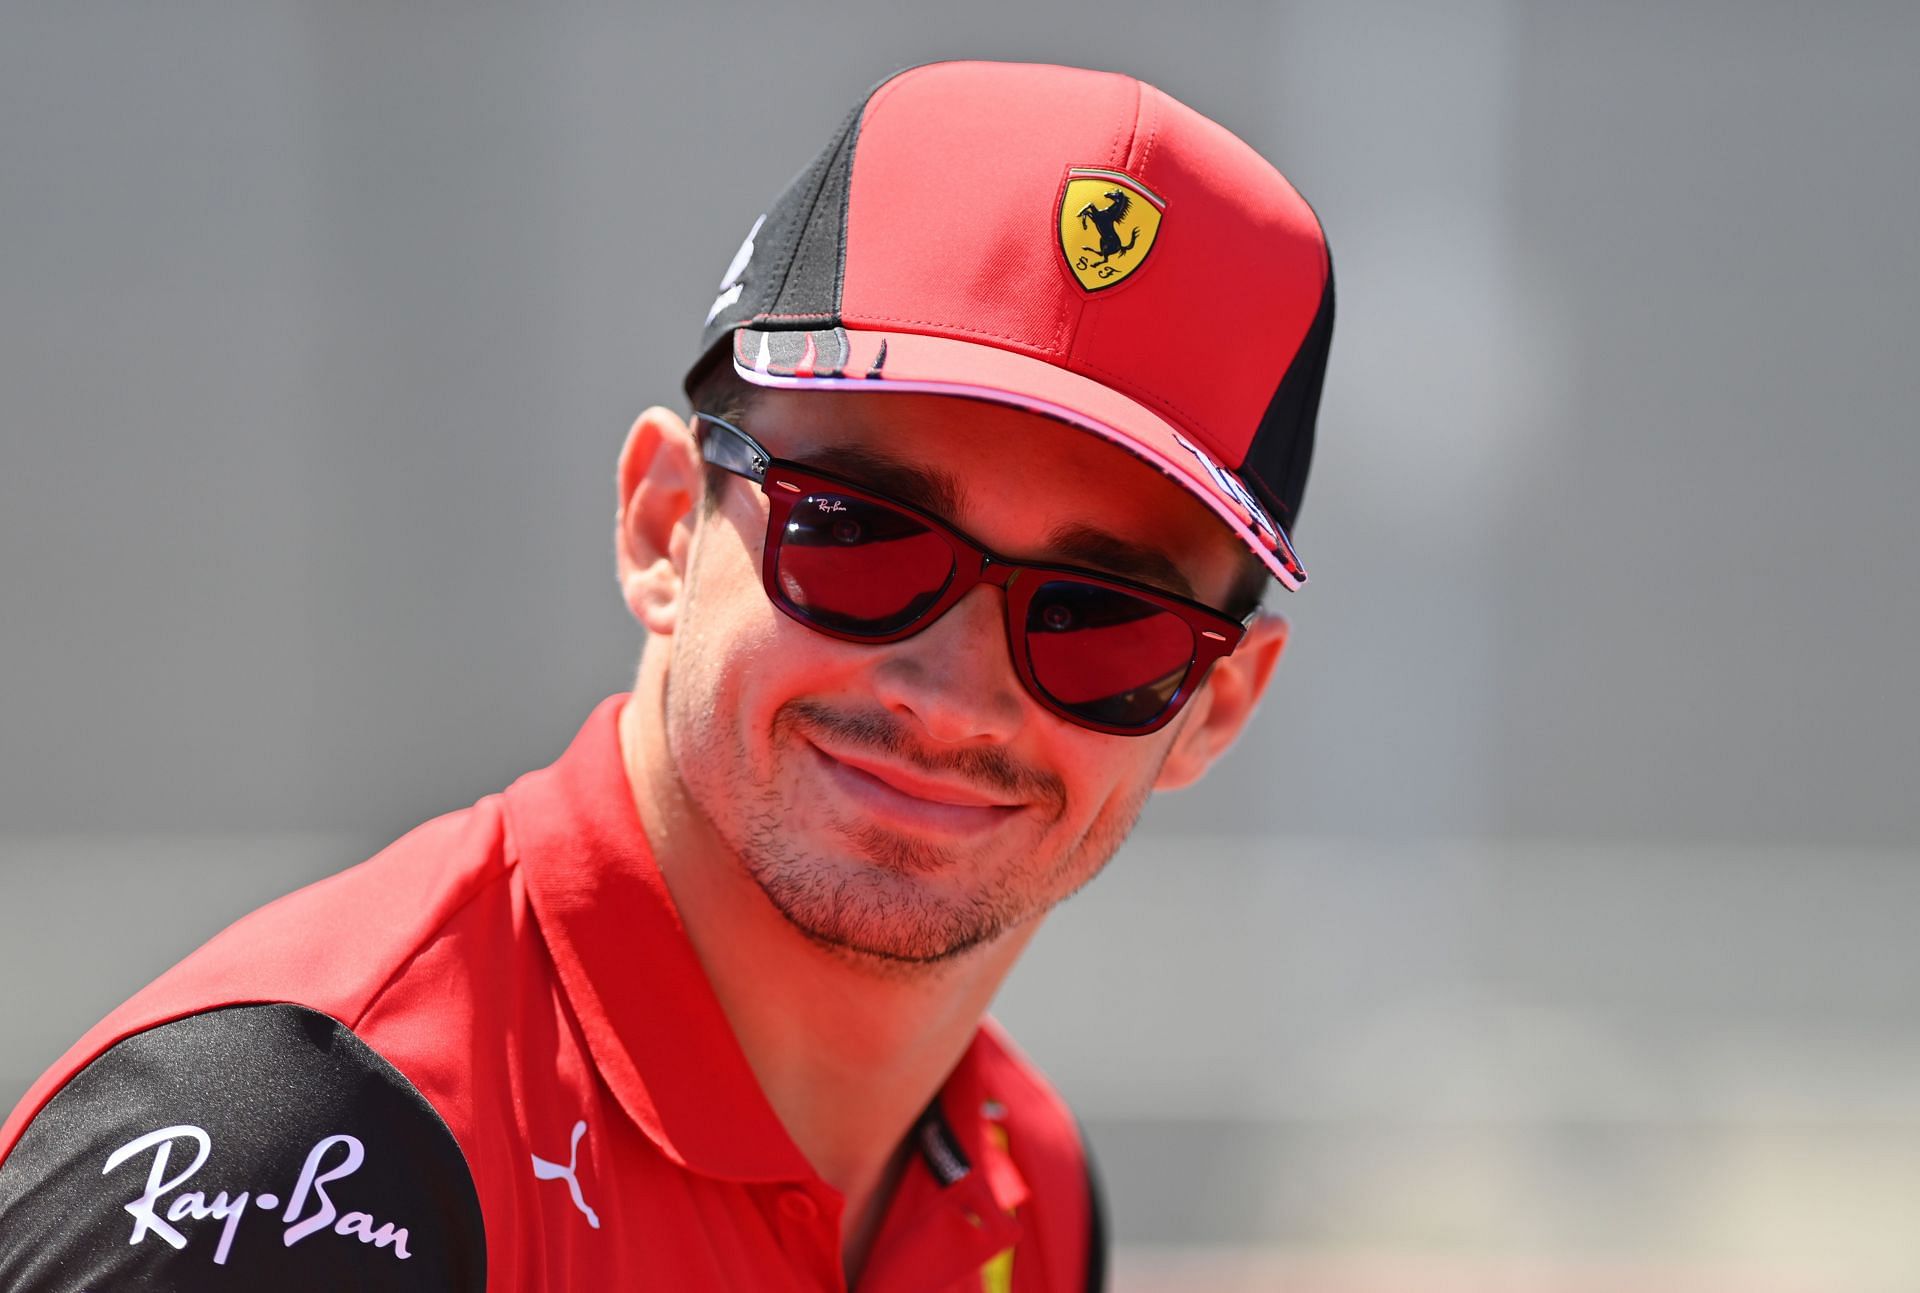 Charles Leclerc might be looking at options in the future if the Ferrari relationship does not work out